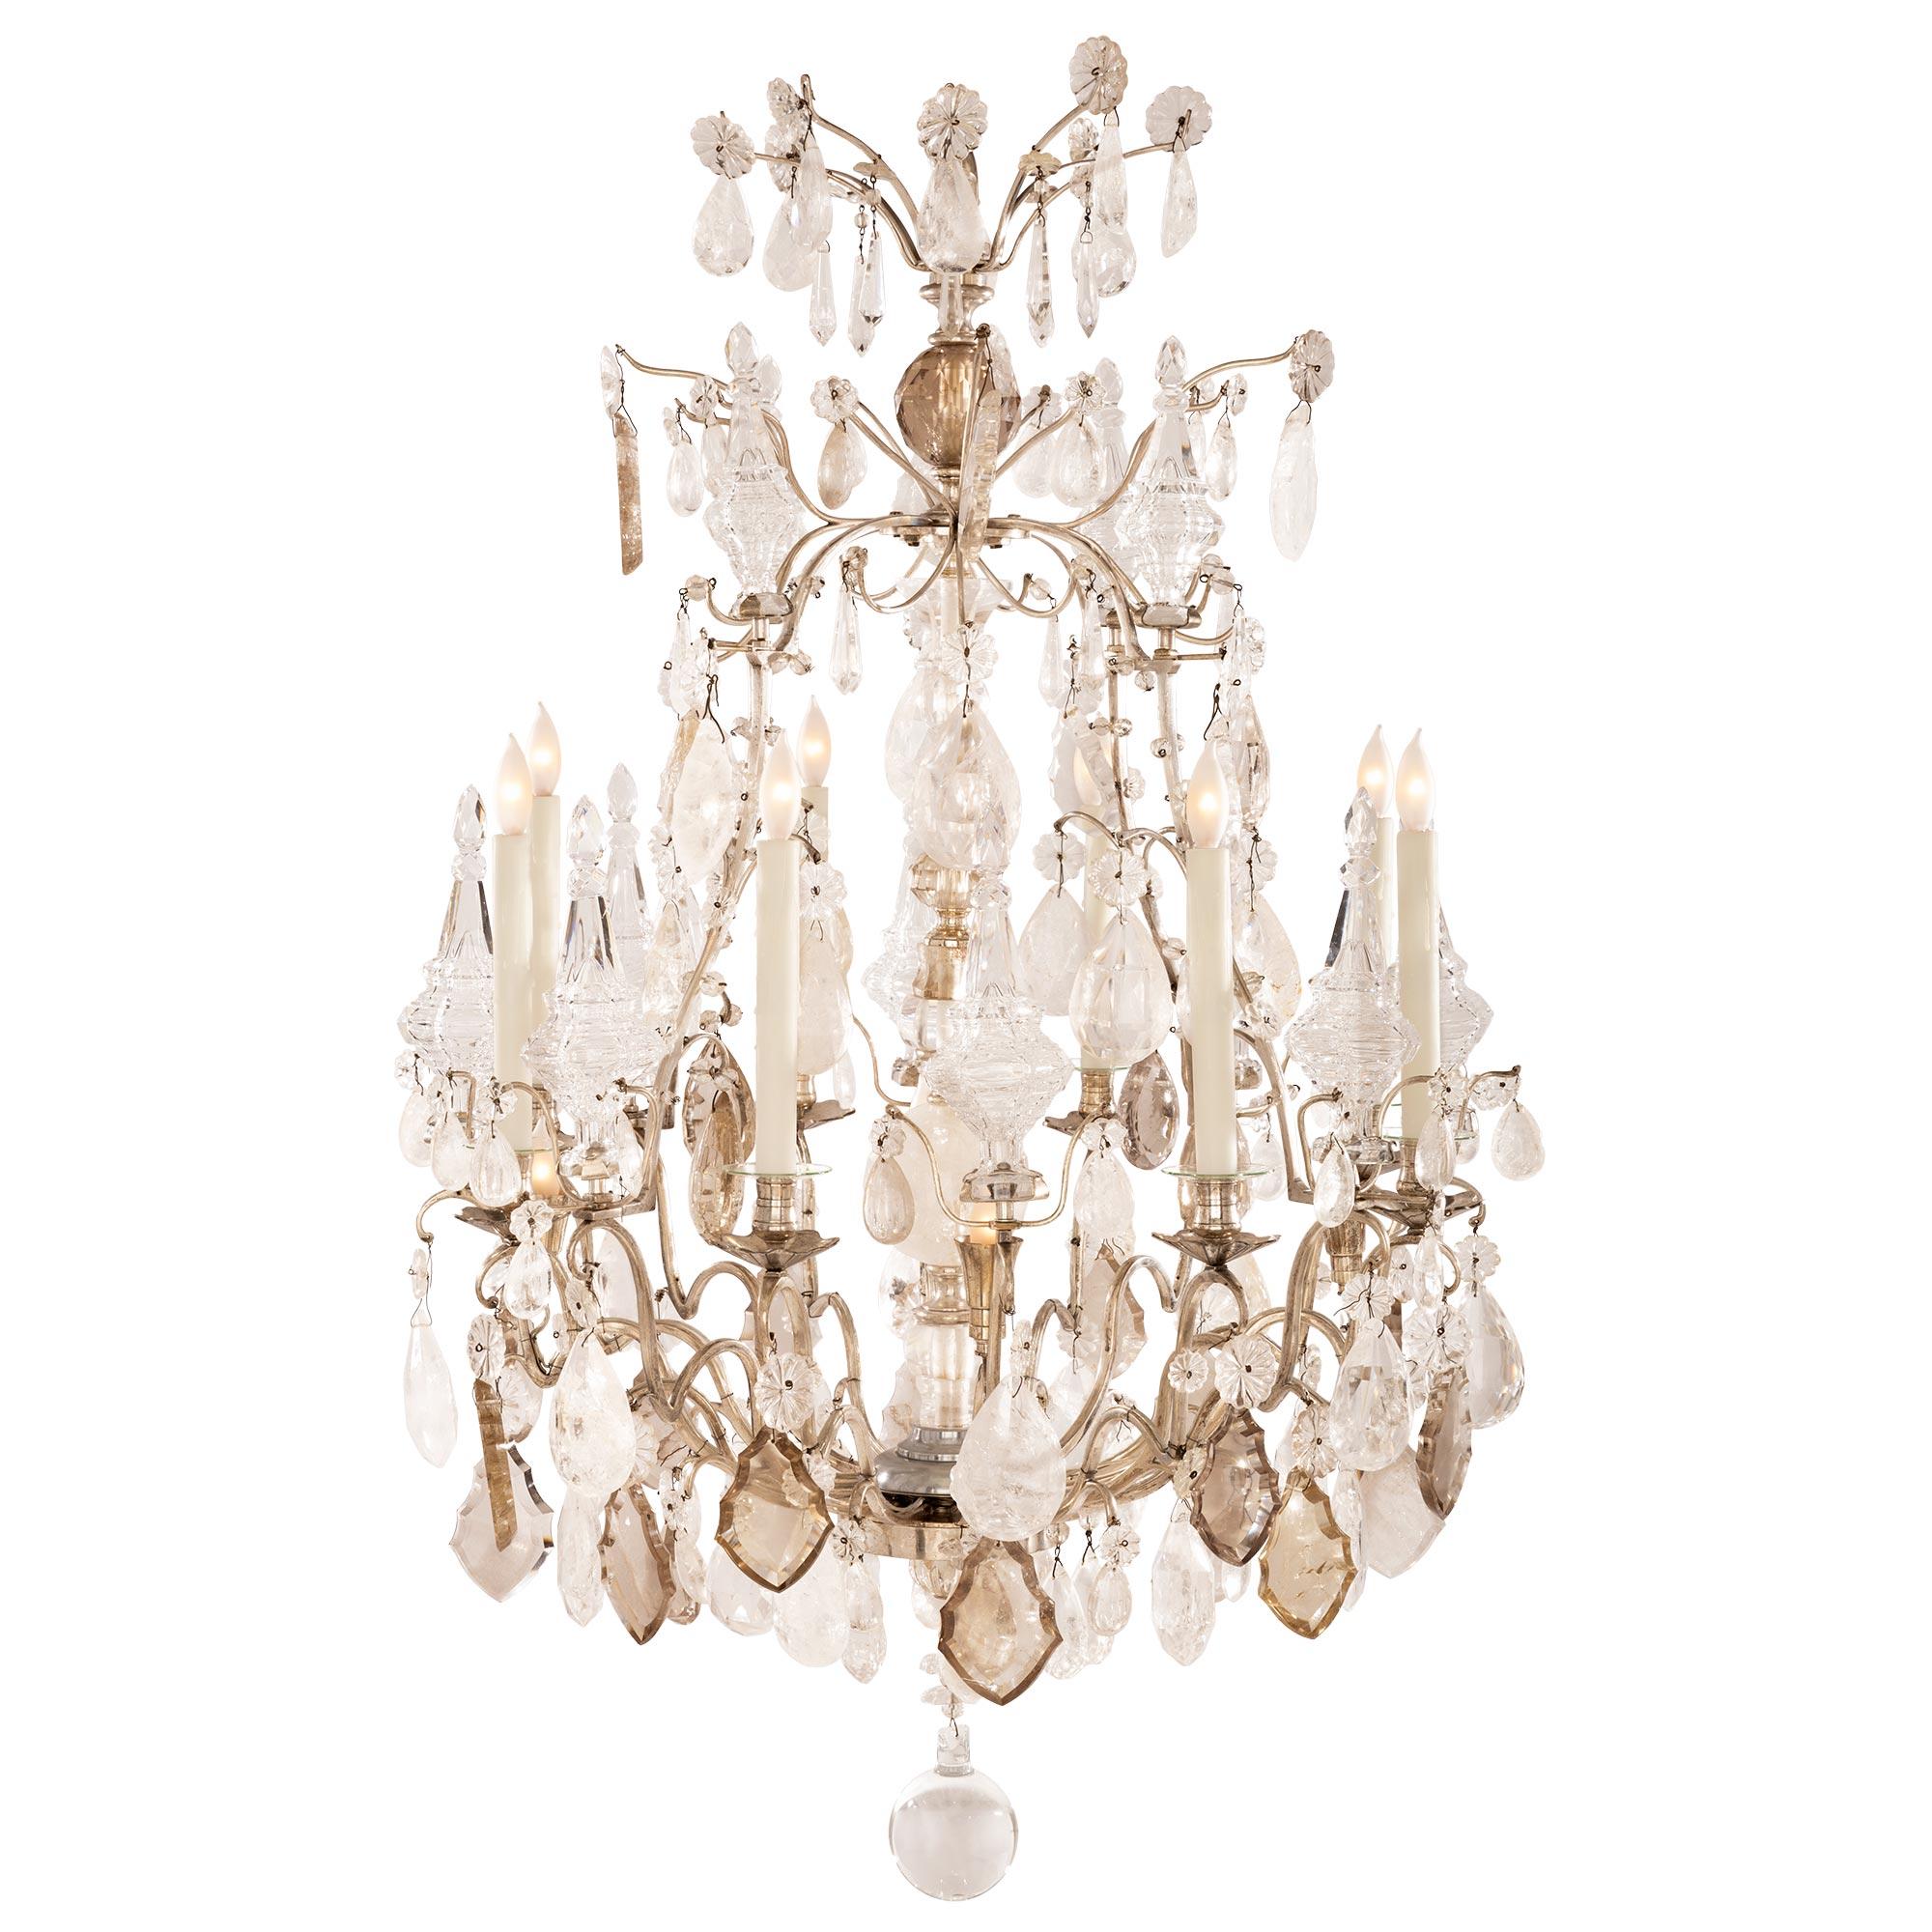 An outstanding and extremely high quality French early 19th century Louis XV st. silvered bronze and rock crystal chandelier. The sixteen arm chandelier is centered by a beautiful solid rock crystal ball below a circular reserve from where the